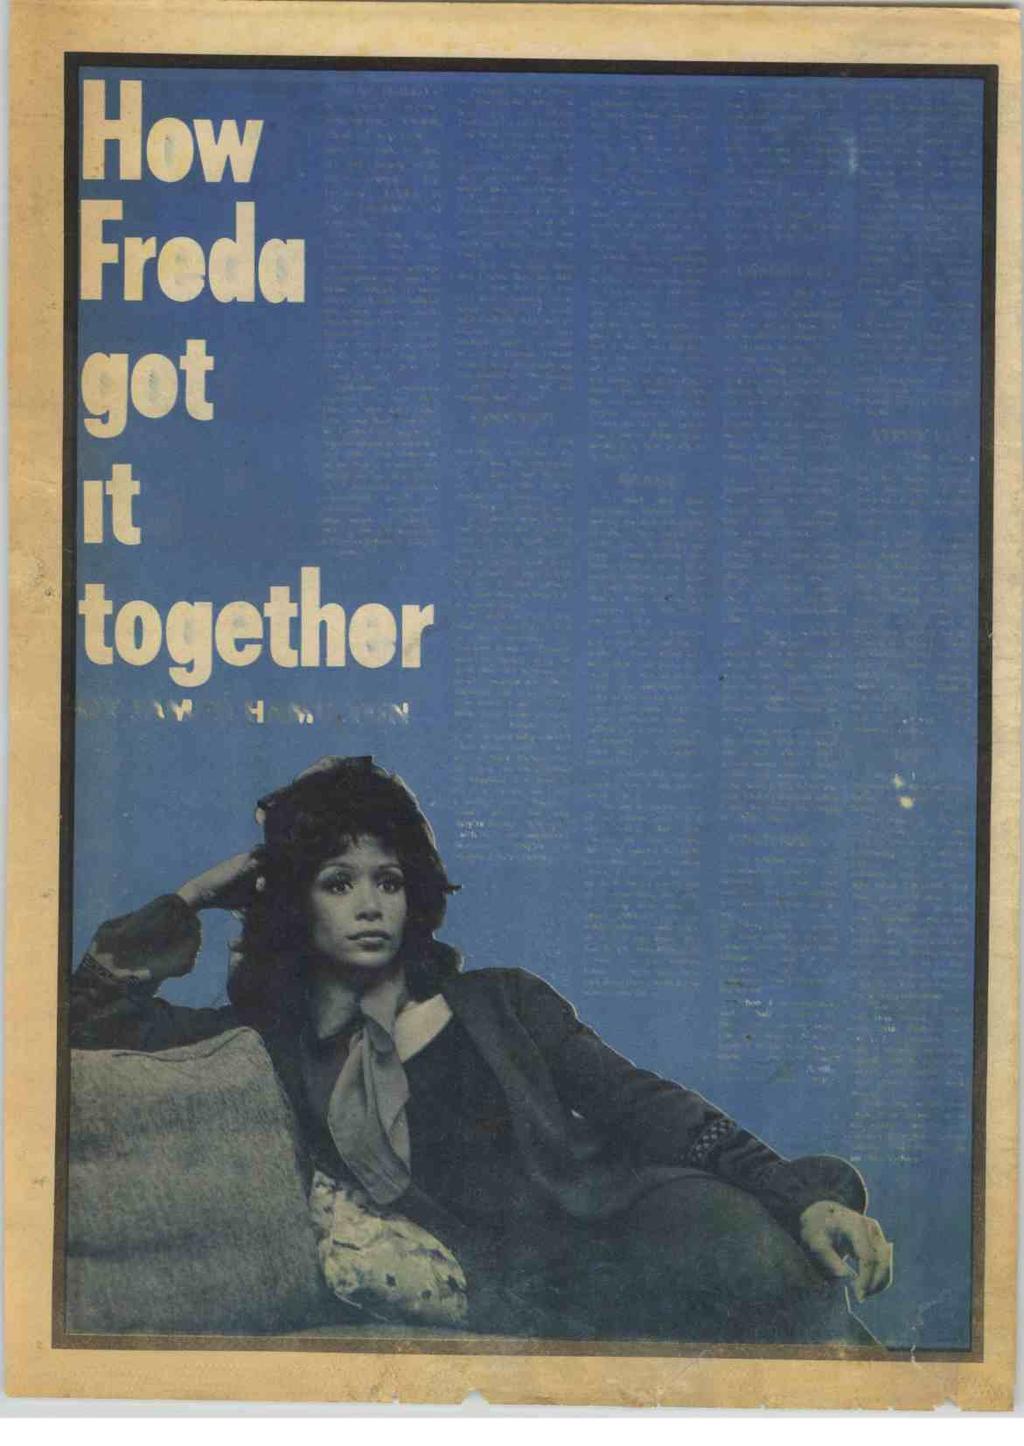 24 RECORD MIRROR, May 15, 1971 How Freda got it togeth "BRIAN Holland is a very nice, easy-going, lovable kind of a person - easy to talk to and to get along with. Nice people.